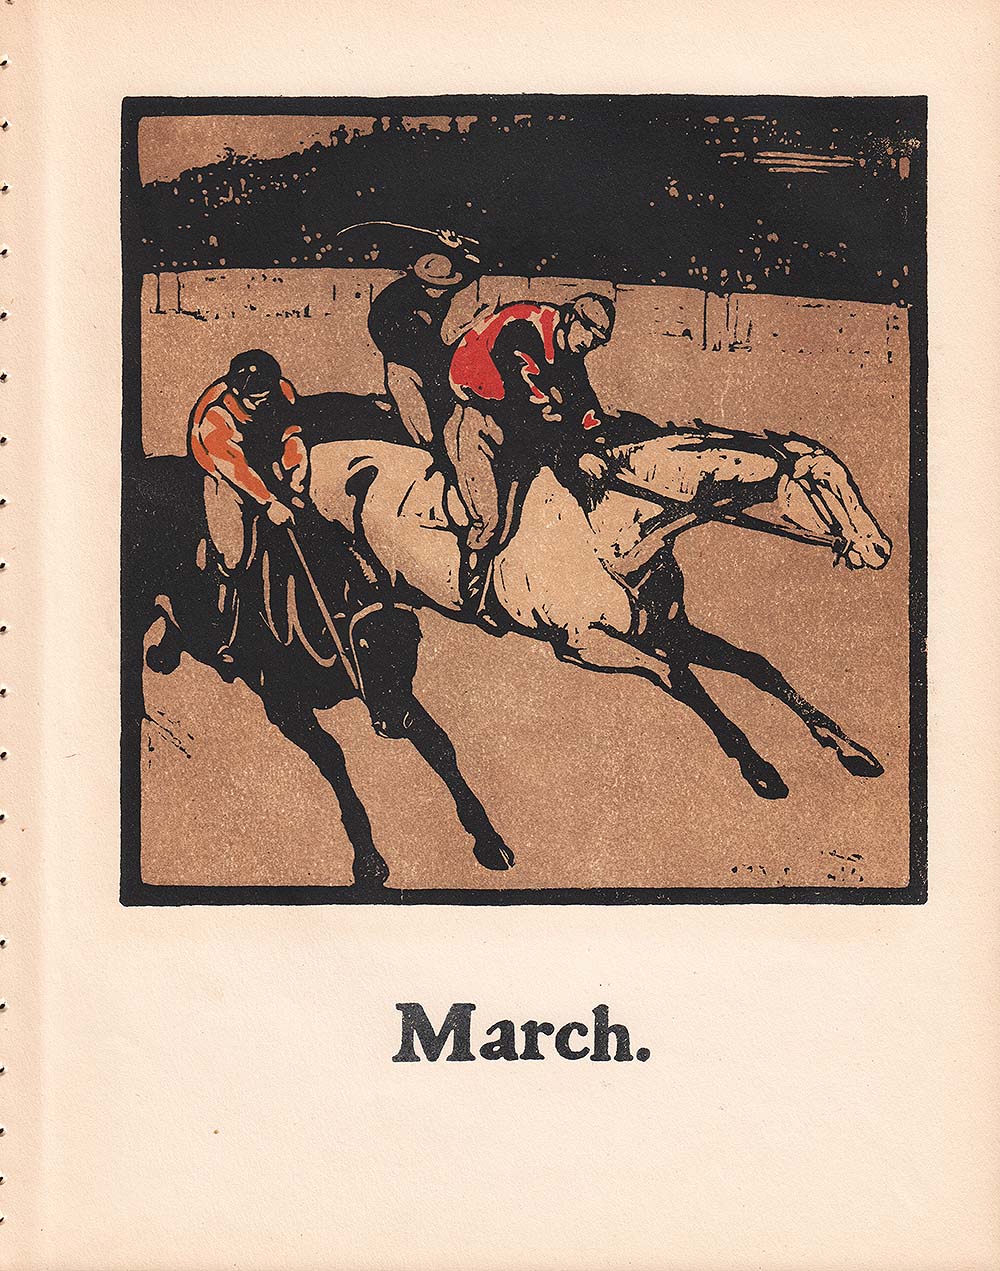 March - Racing